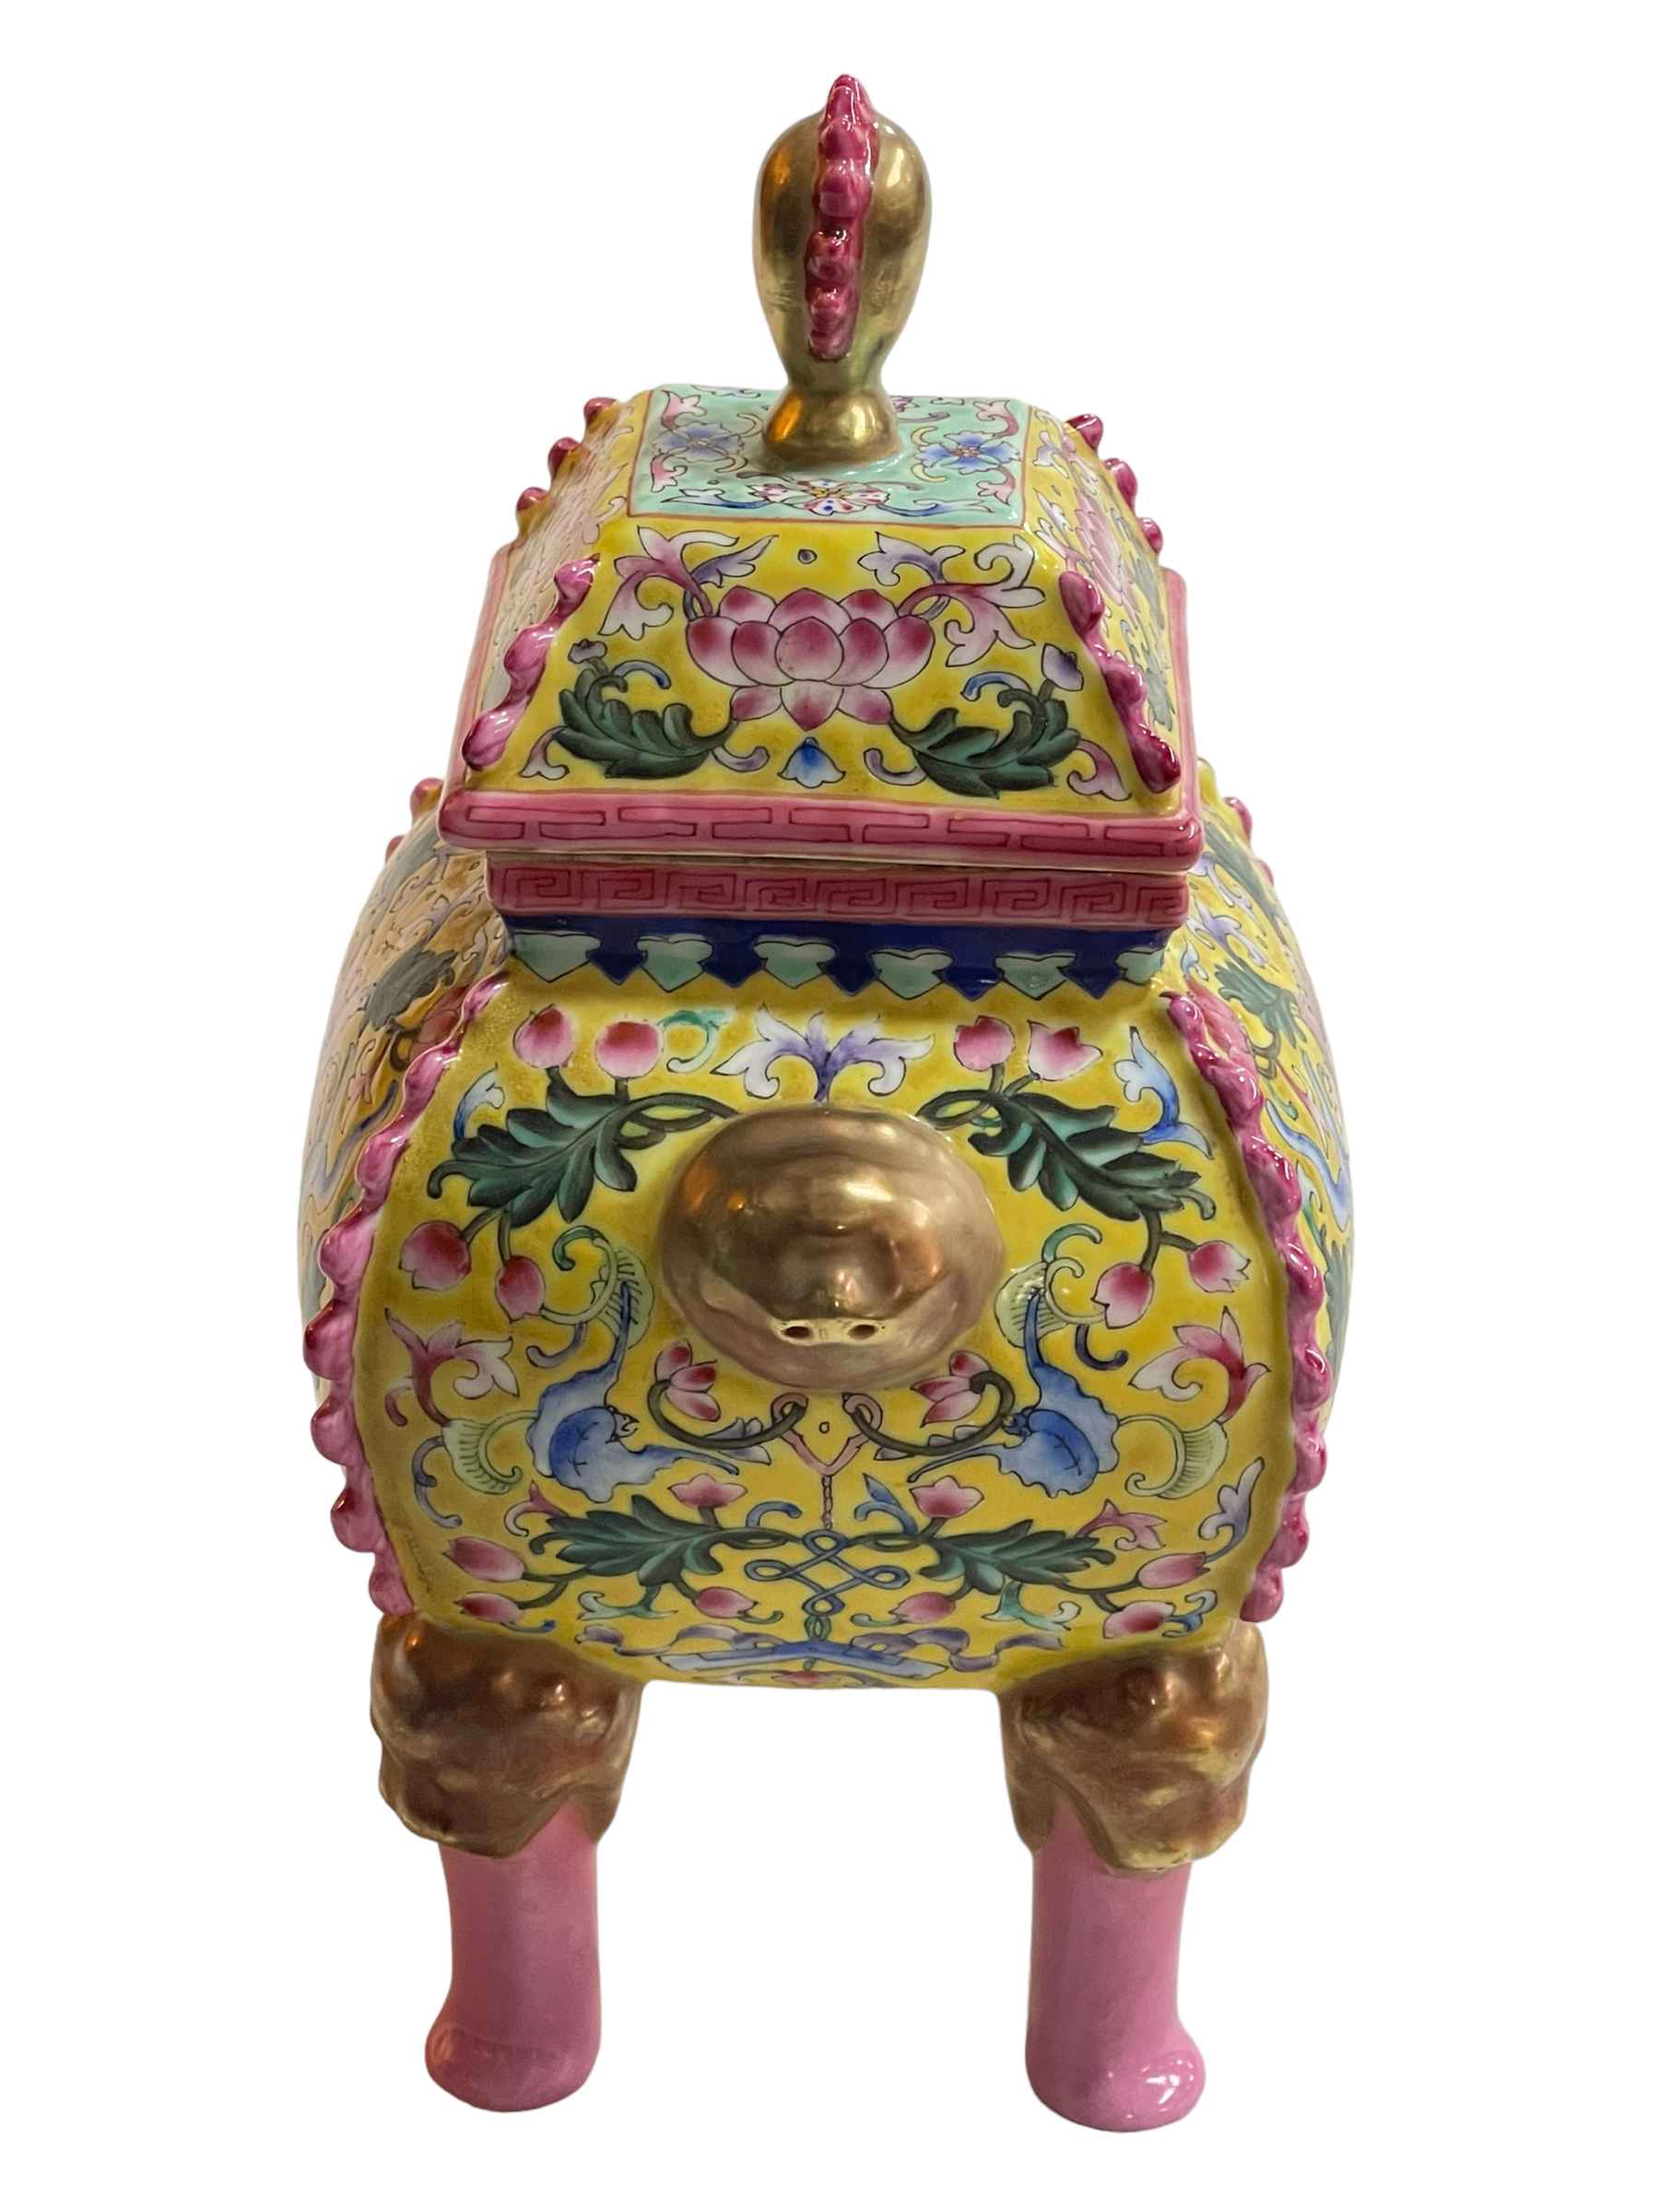 Chinese pottery four legged censor with floral and gilt design on yellow and pink ground, - Image 2 of 5